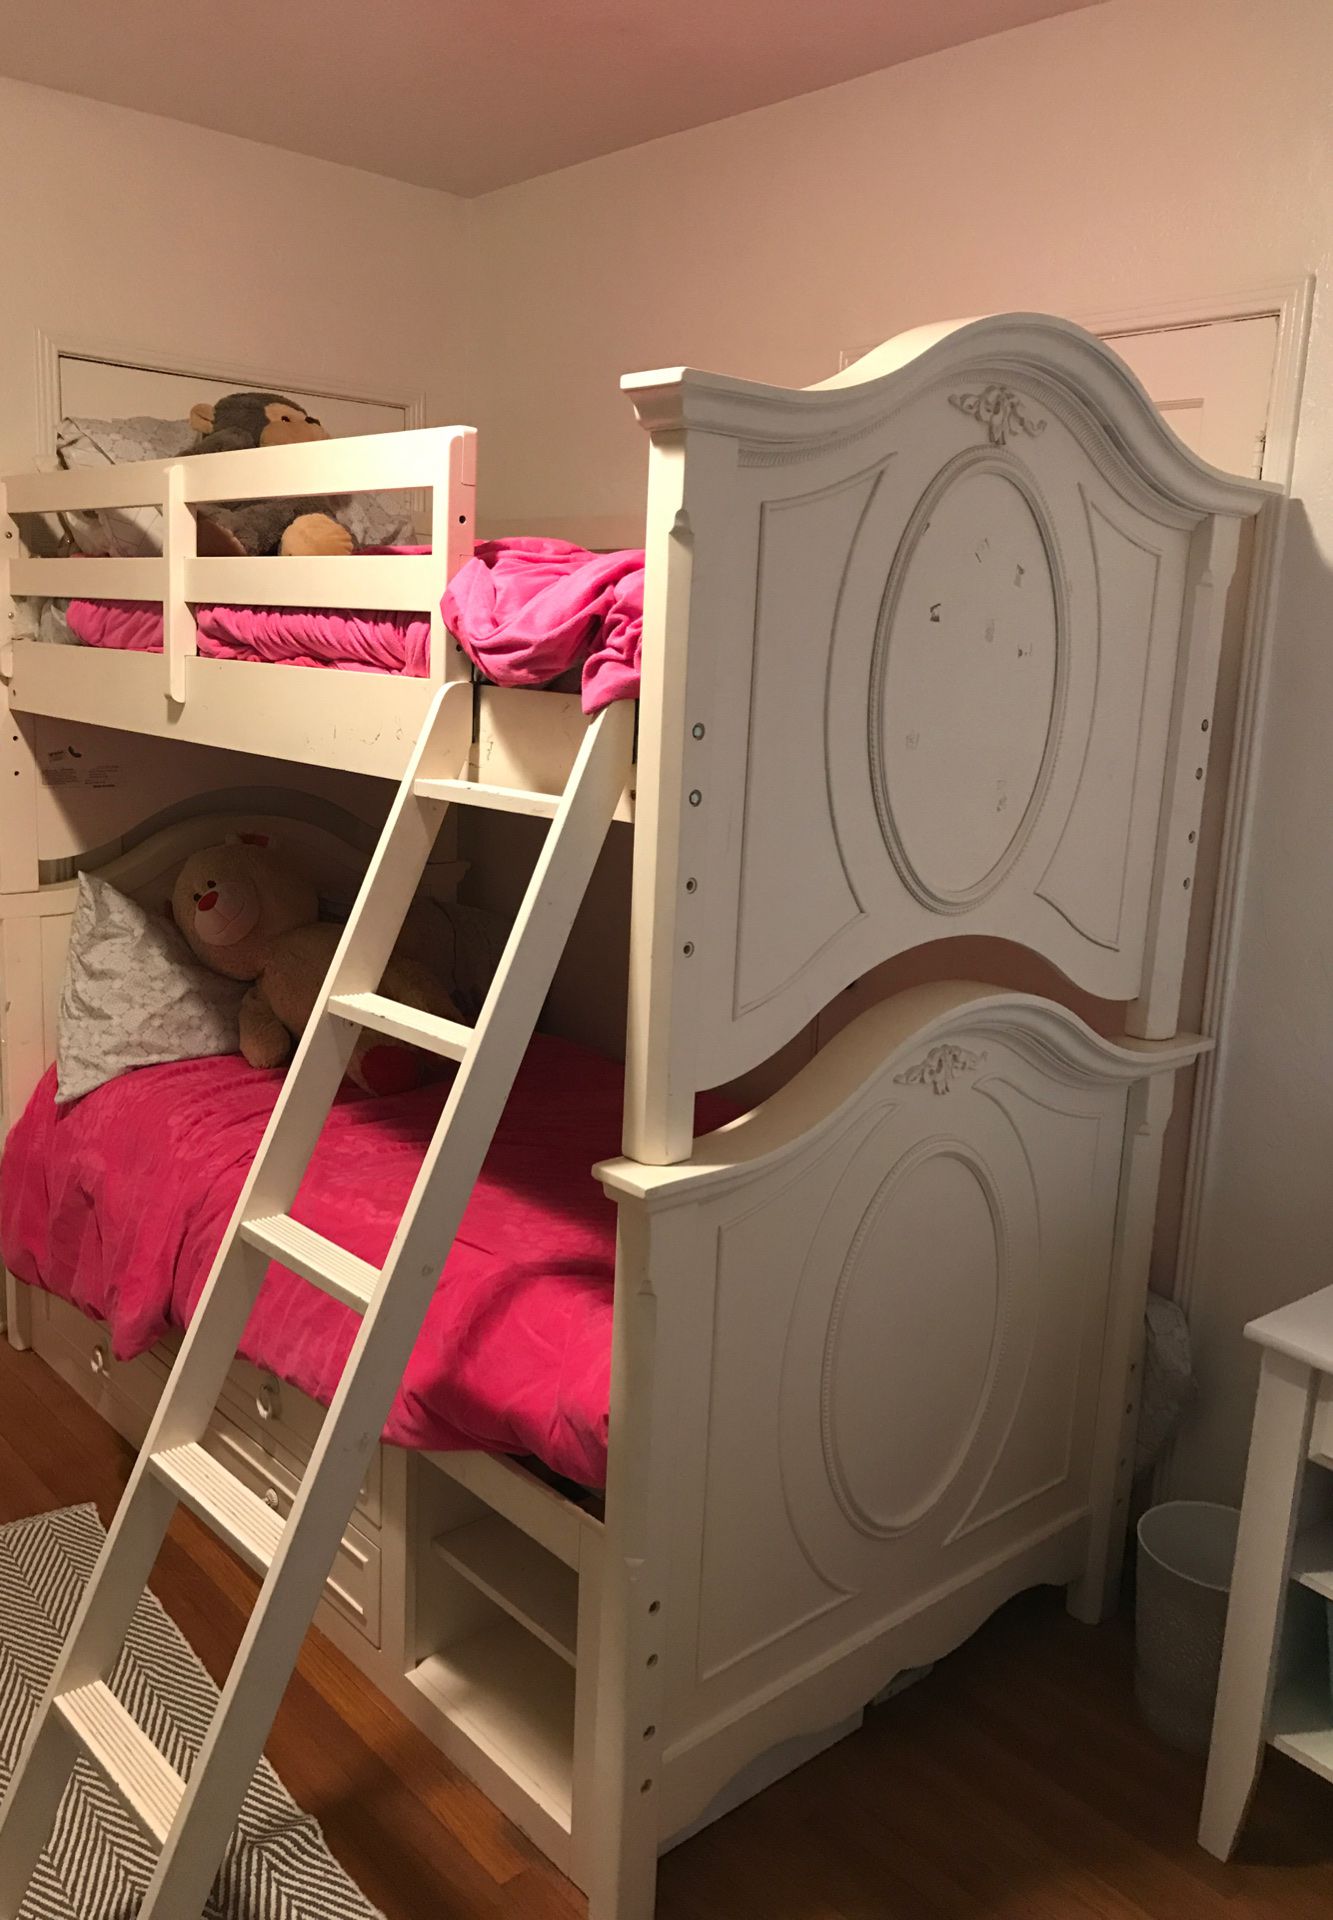 Twin bunk beds. Asking $250 pickup only. Very heavy